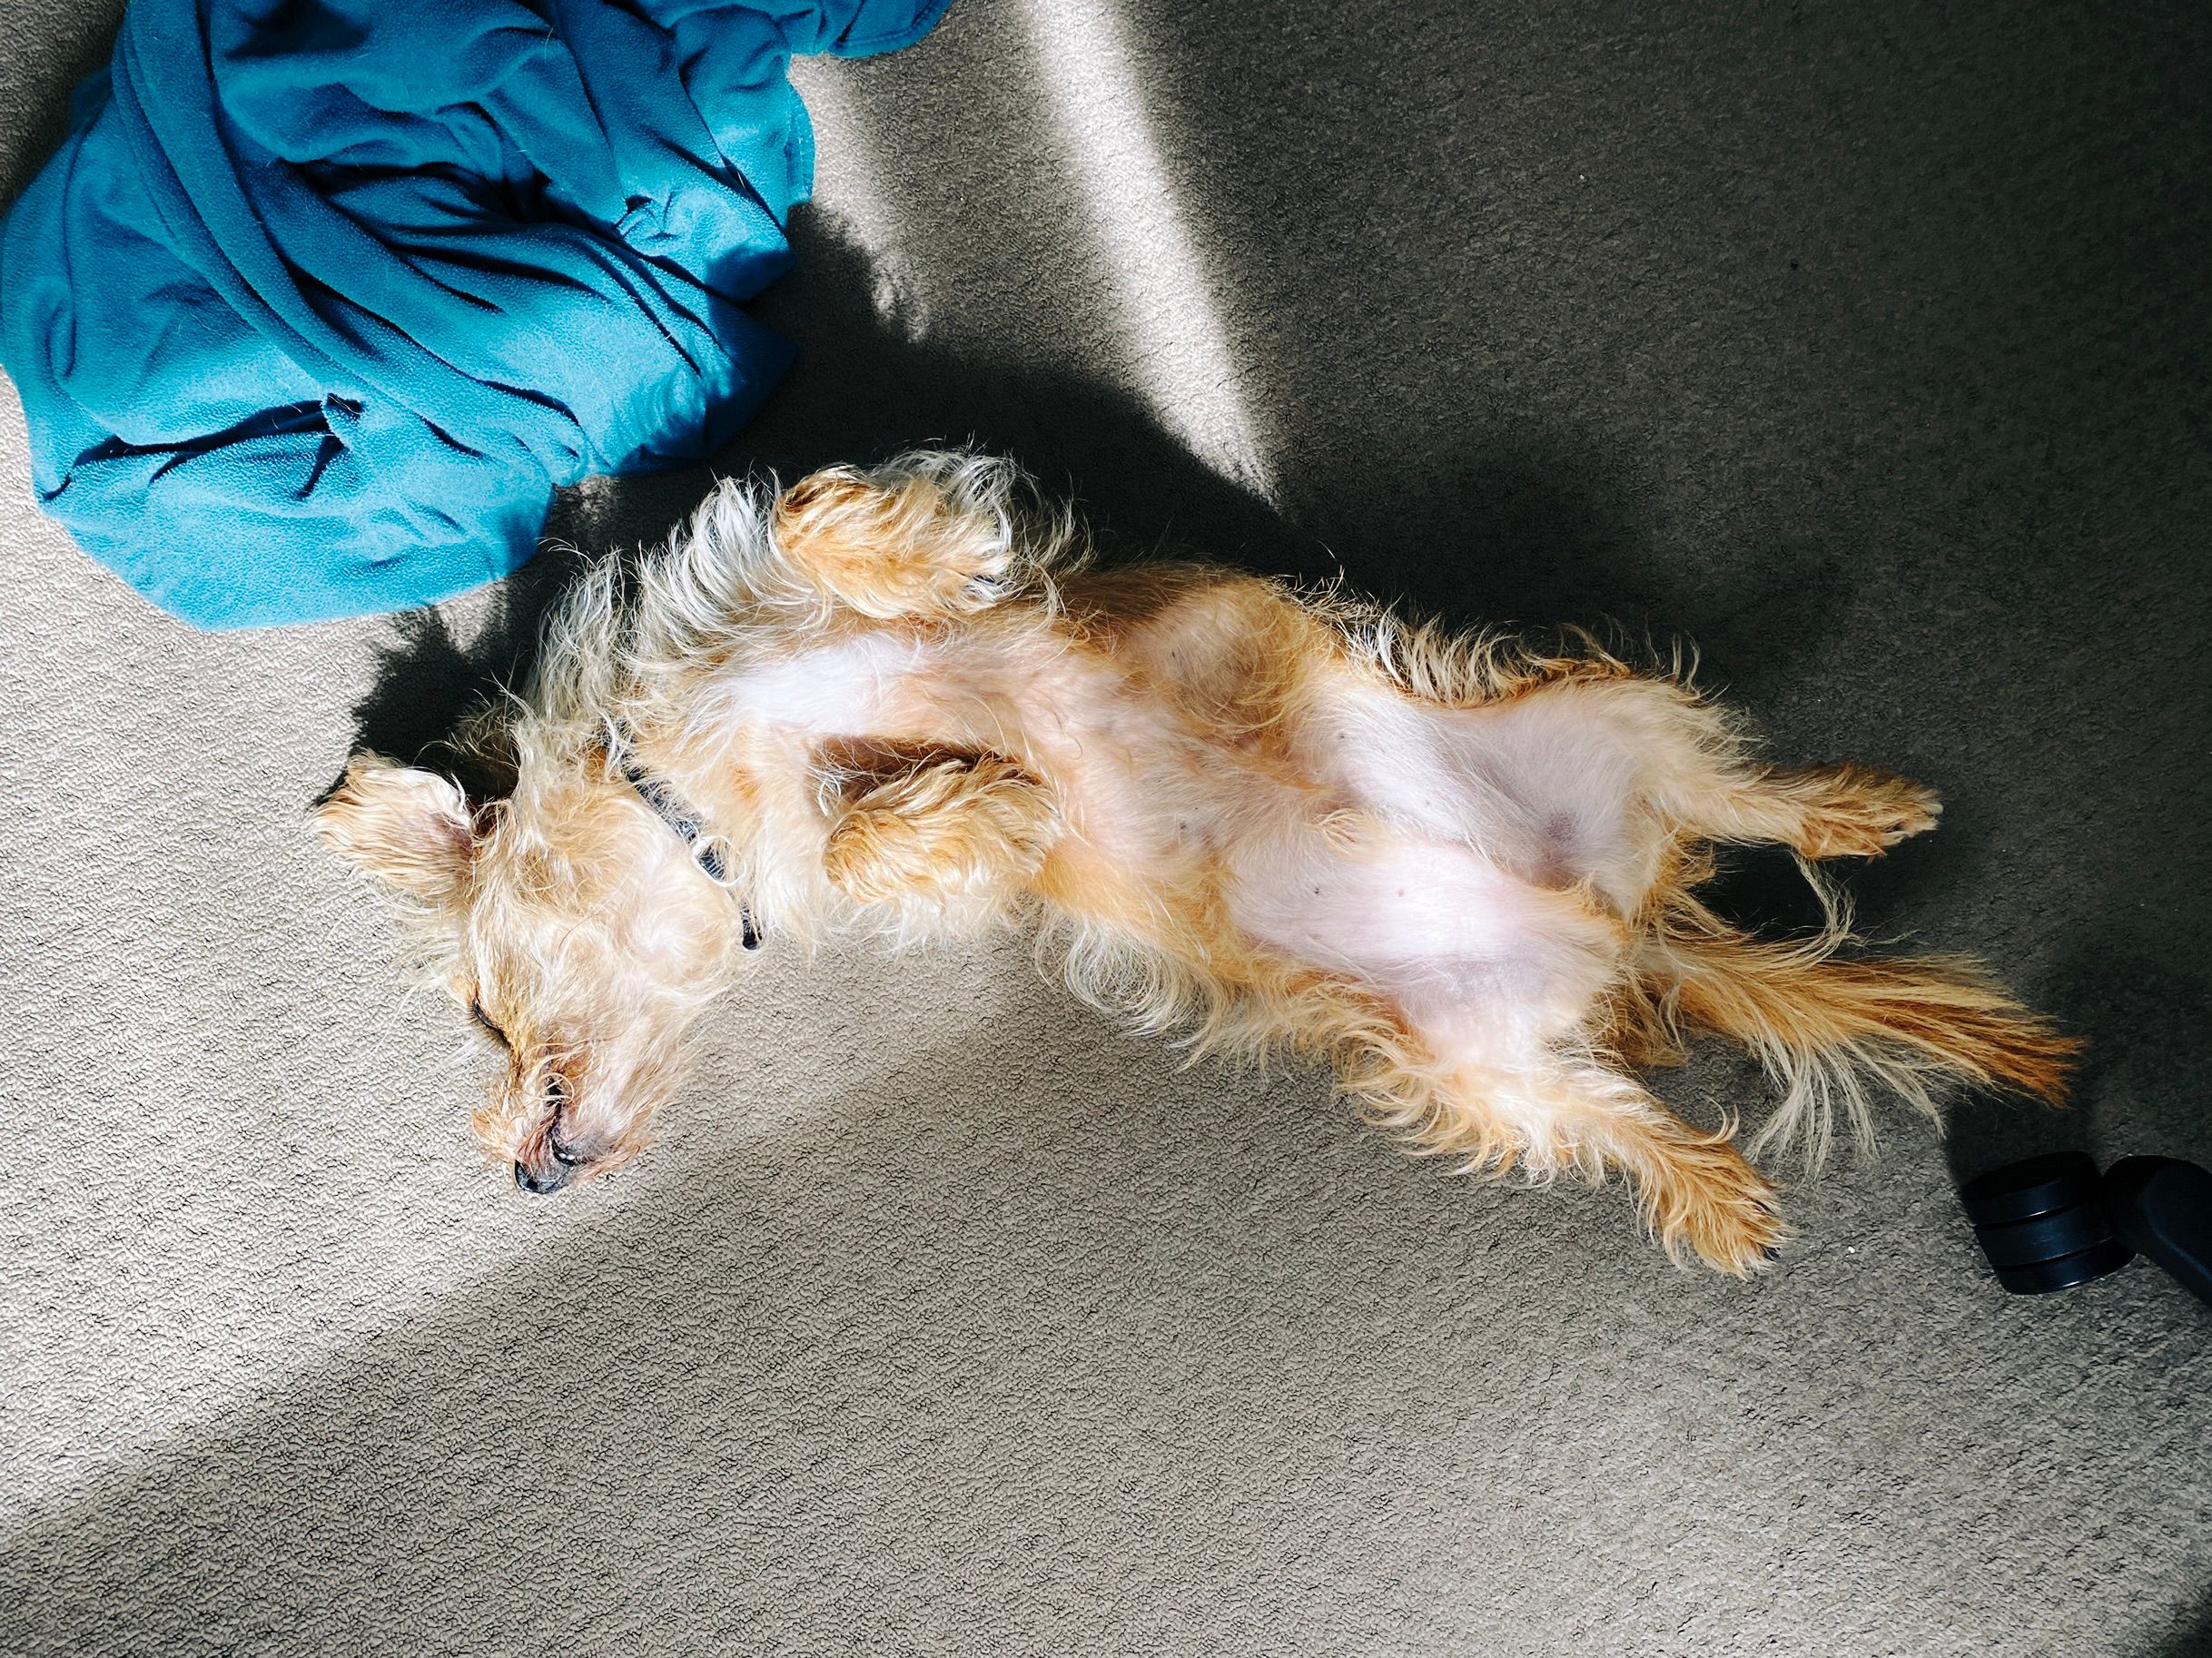 A photo of a small scruffy blonde dog lying upside-down on the floor in a patch of sunshine.